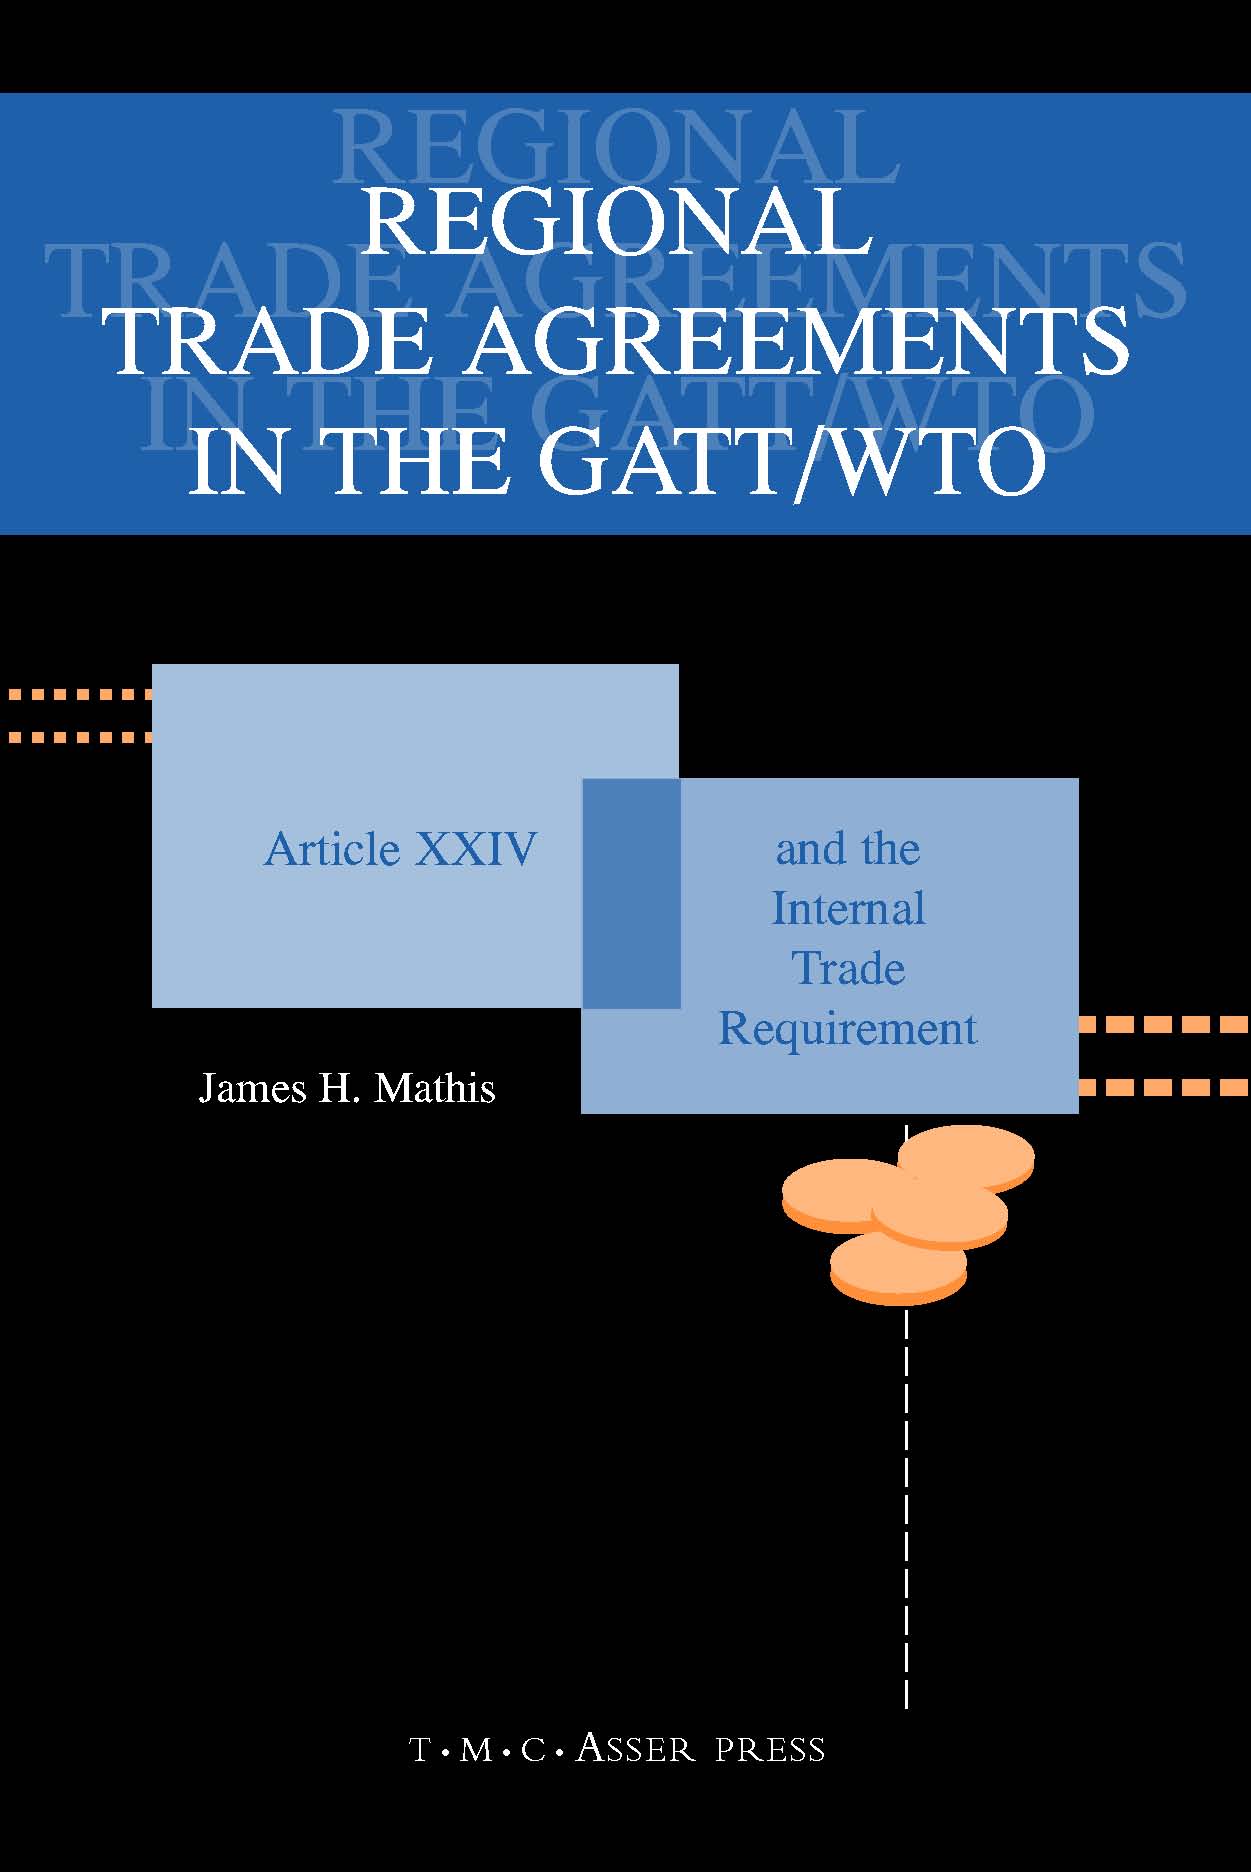 Regional Trade Agreements in the GATT/WTO - Article XXIV and the Internal Trade Requirement